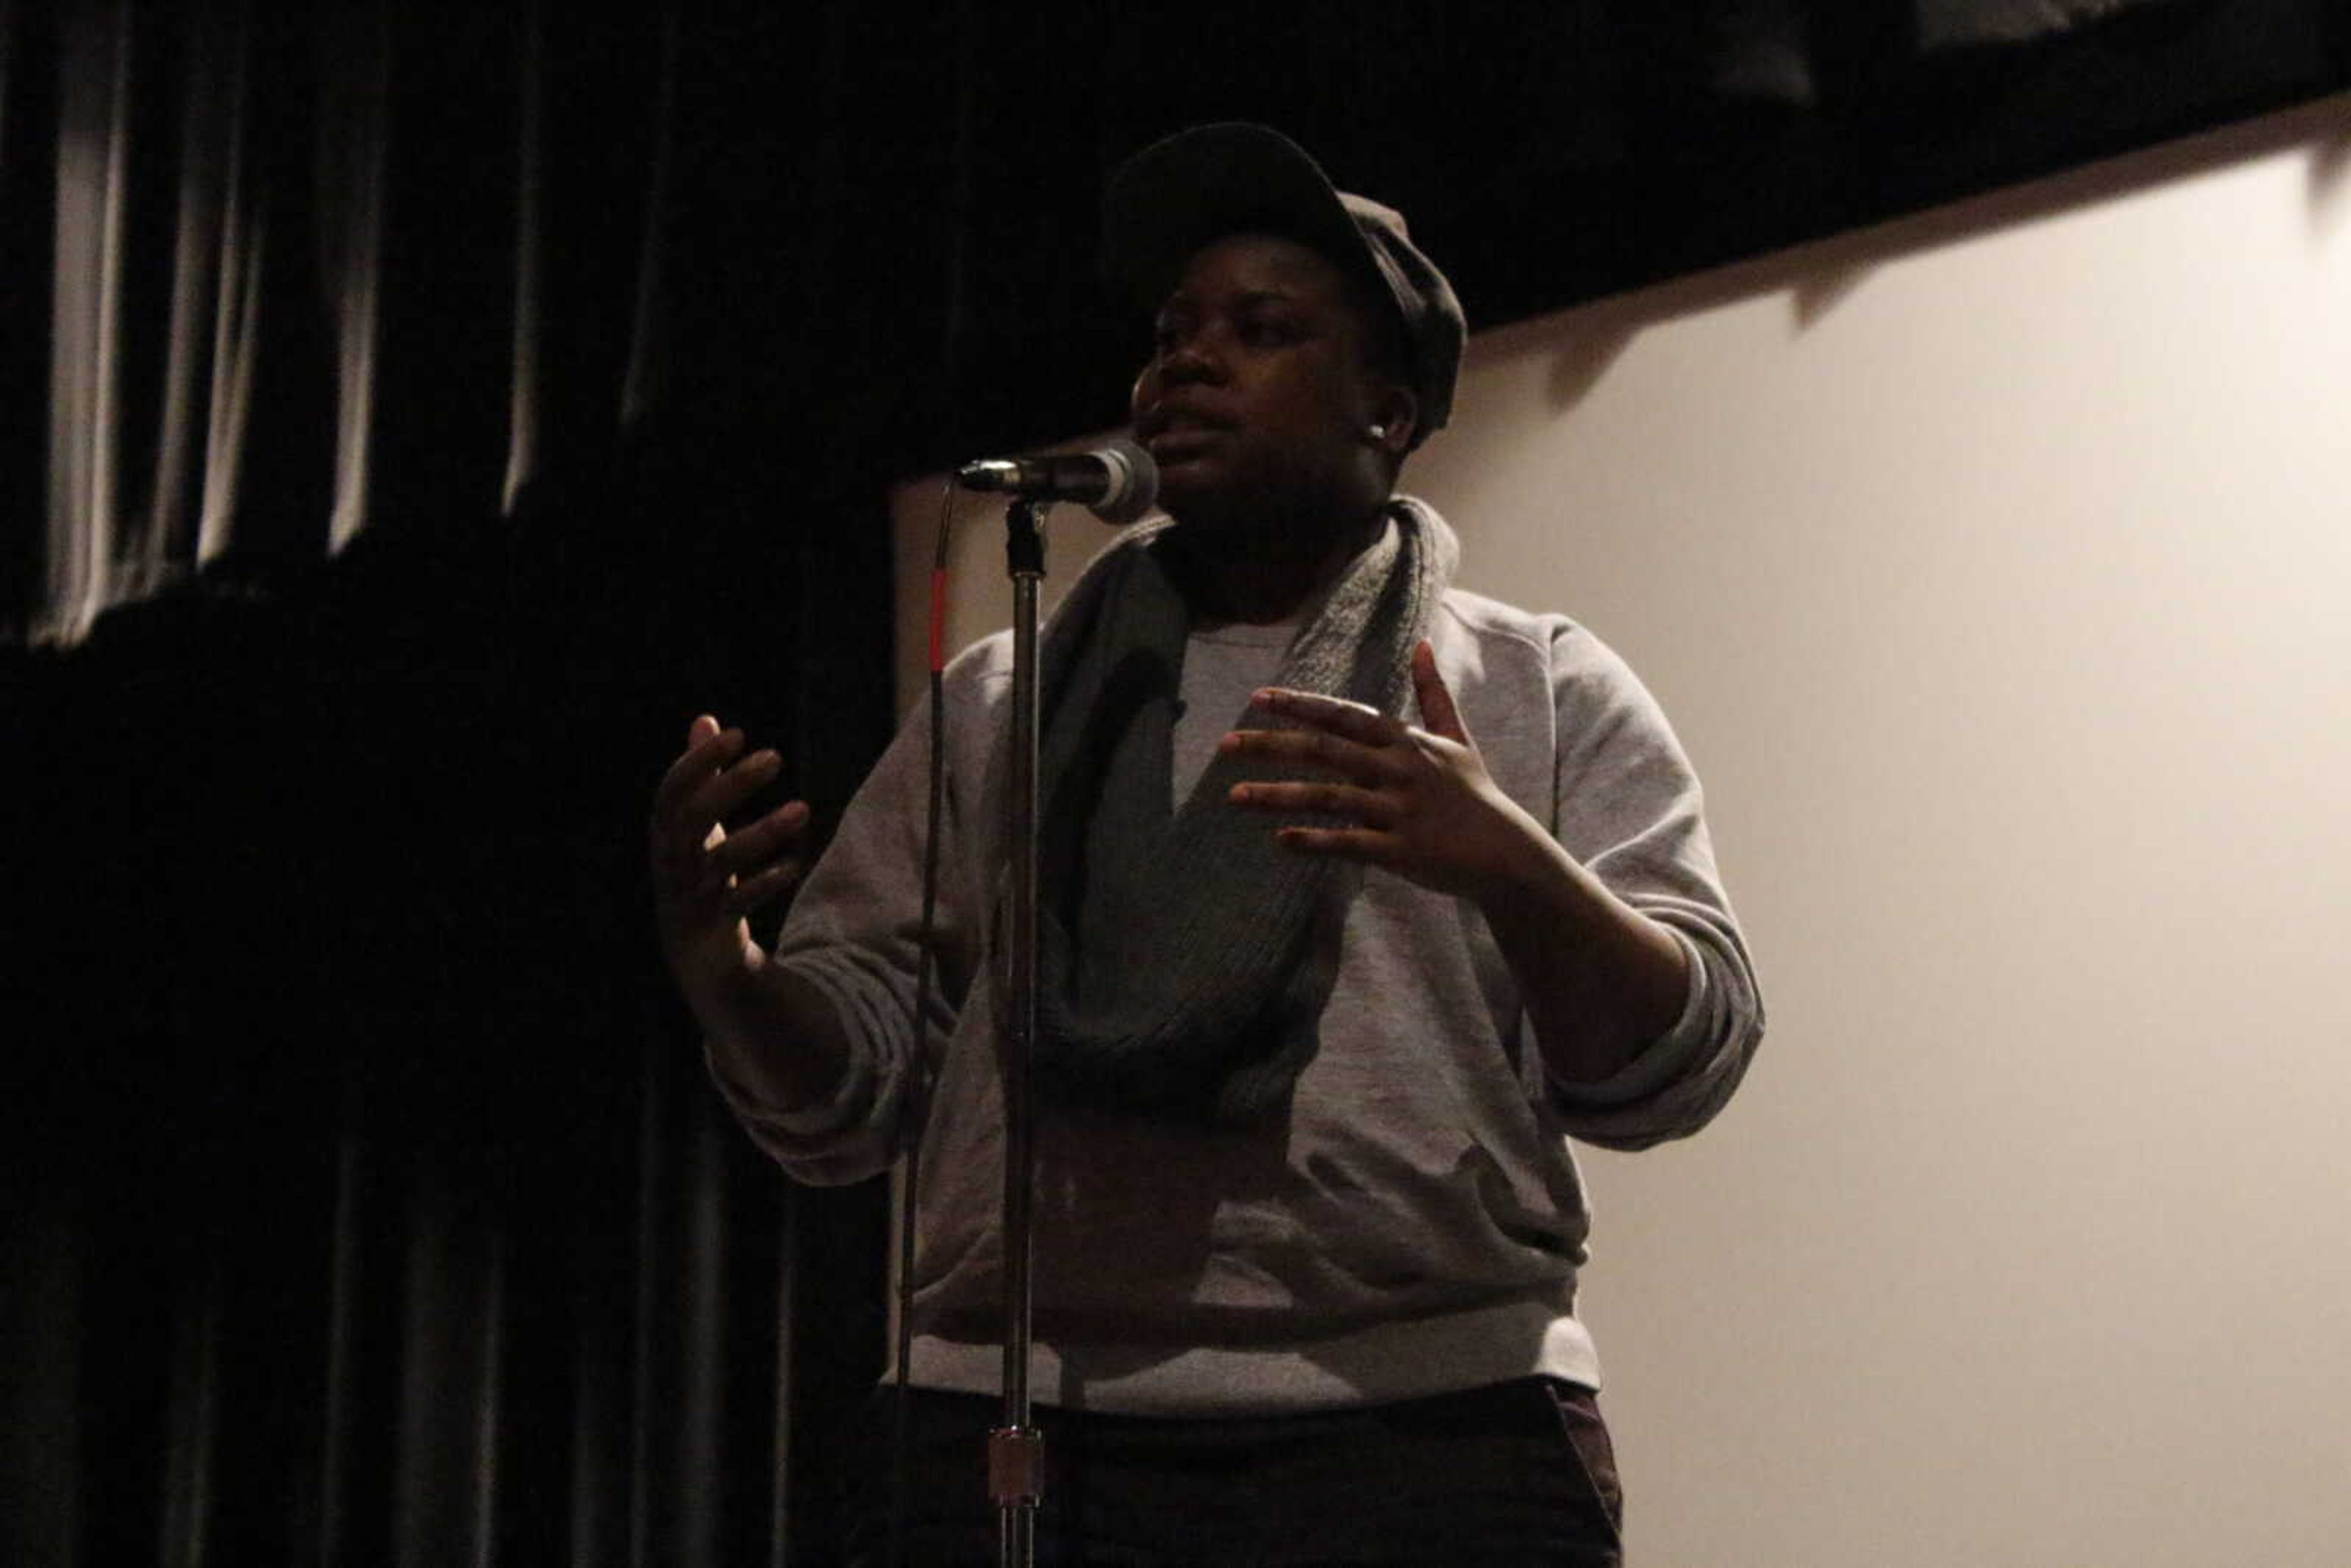 Award winning poet Janae Johnson shared her experiences being black and queer at Rose Theater Feb. 27.